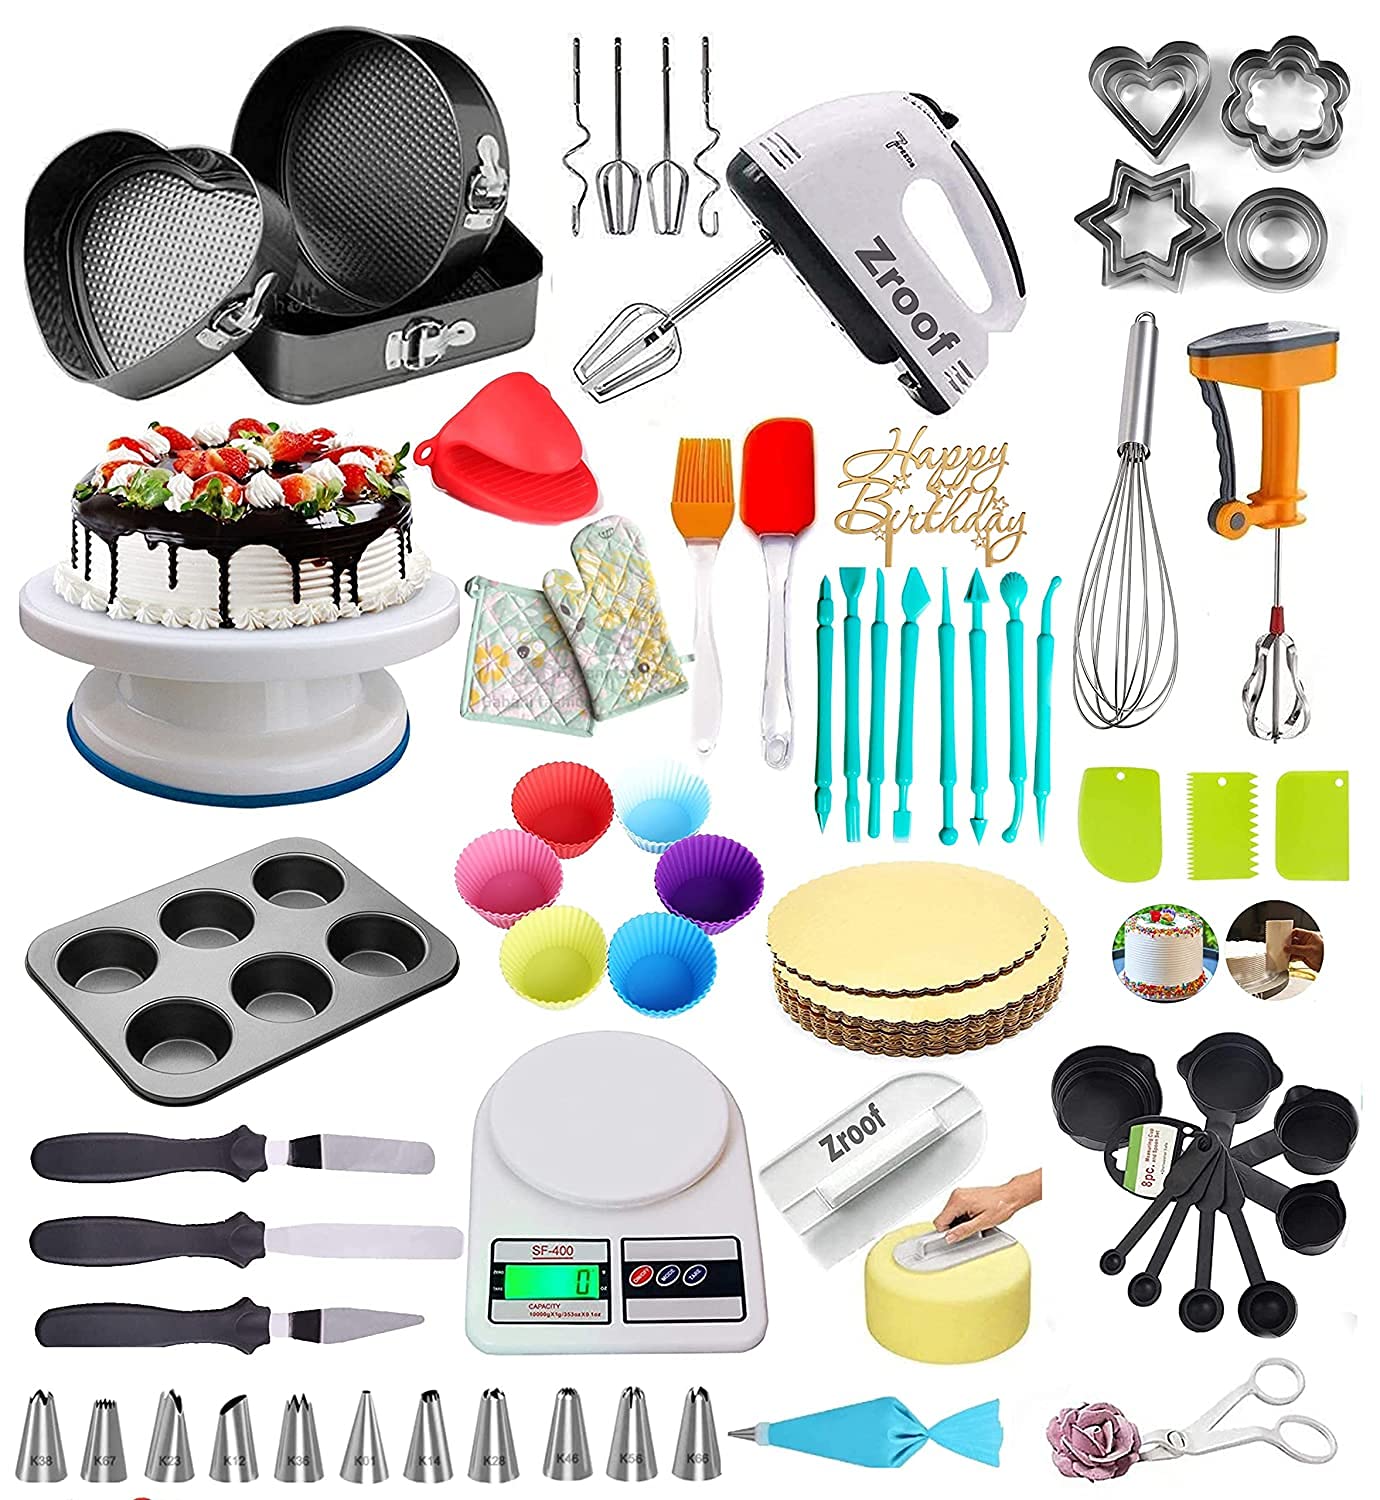 Essential Cake Tools | CHELSWEETS - YouTube